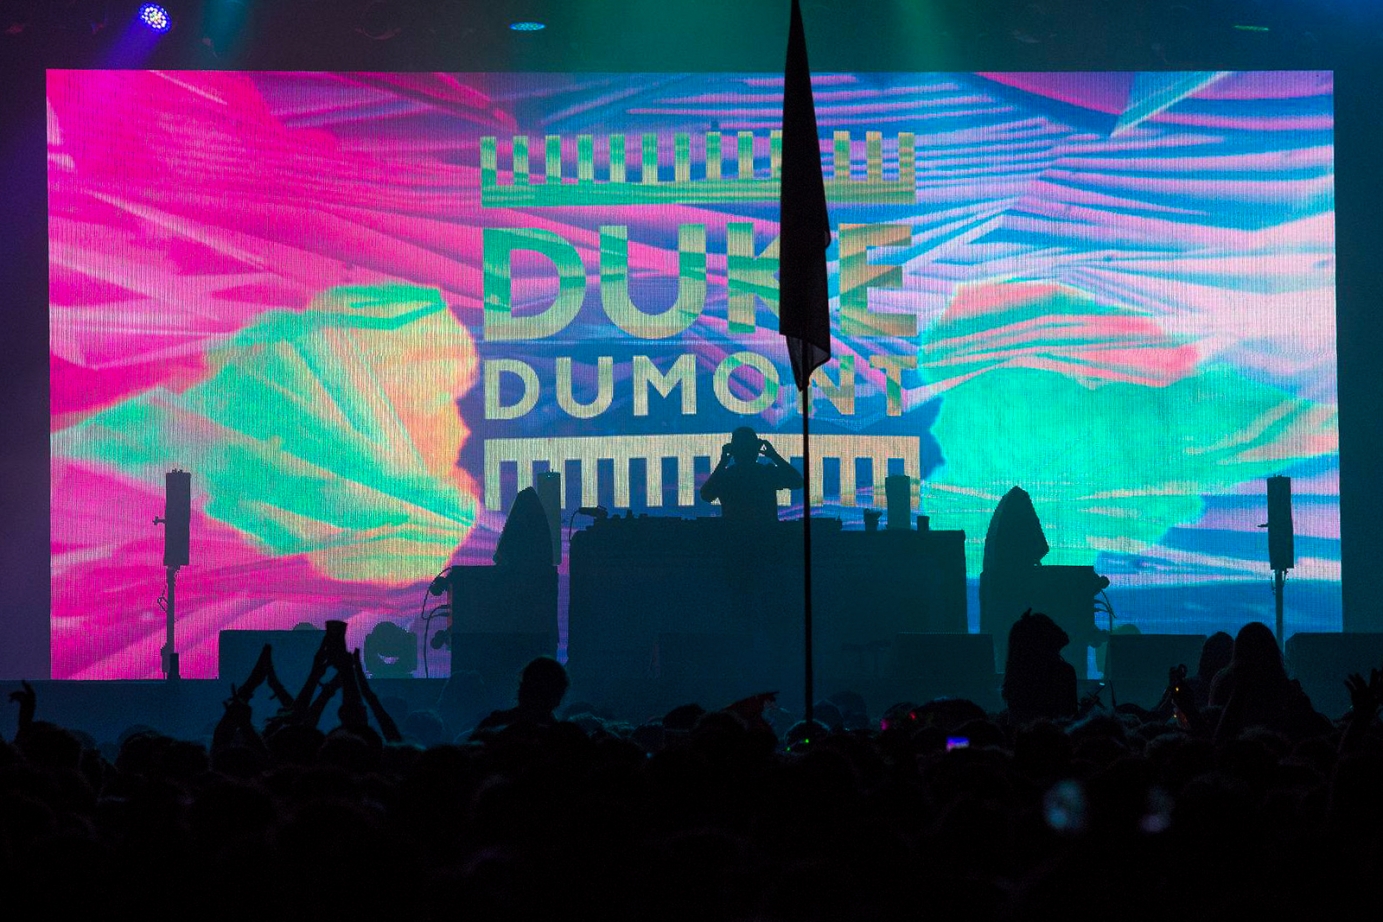 Live visuals for Duke Dumont by Henry Crawfurd